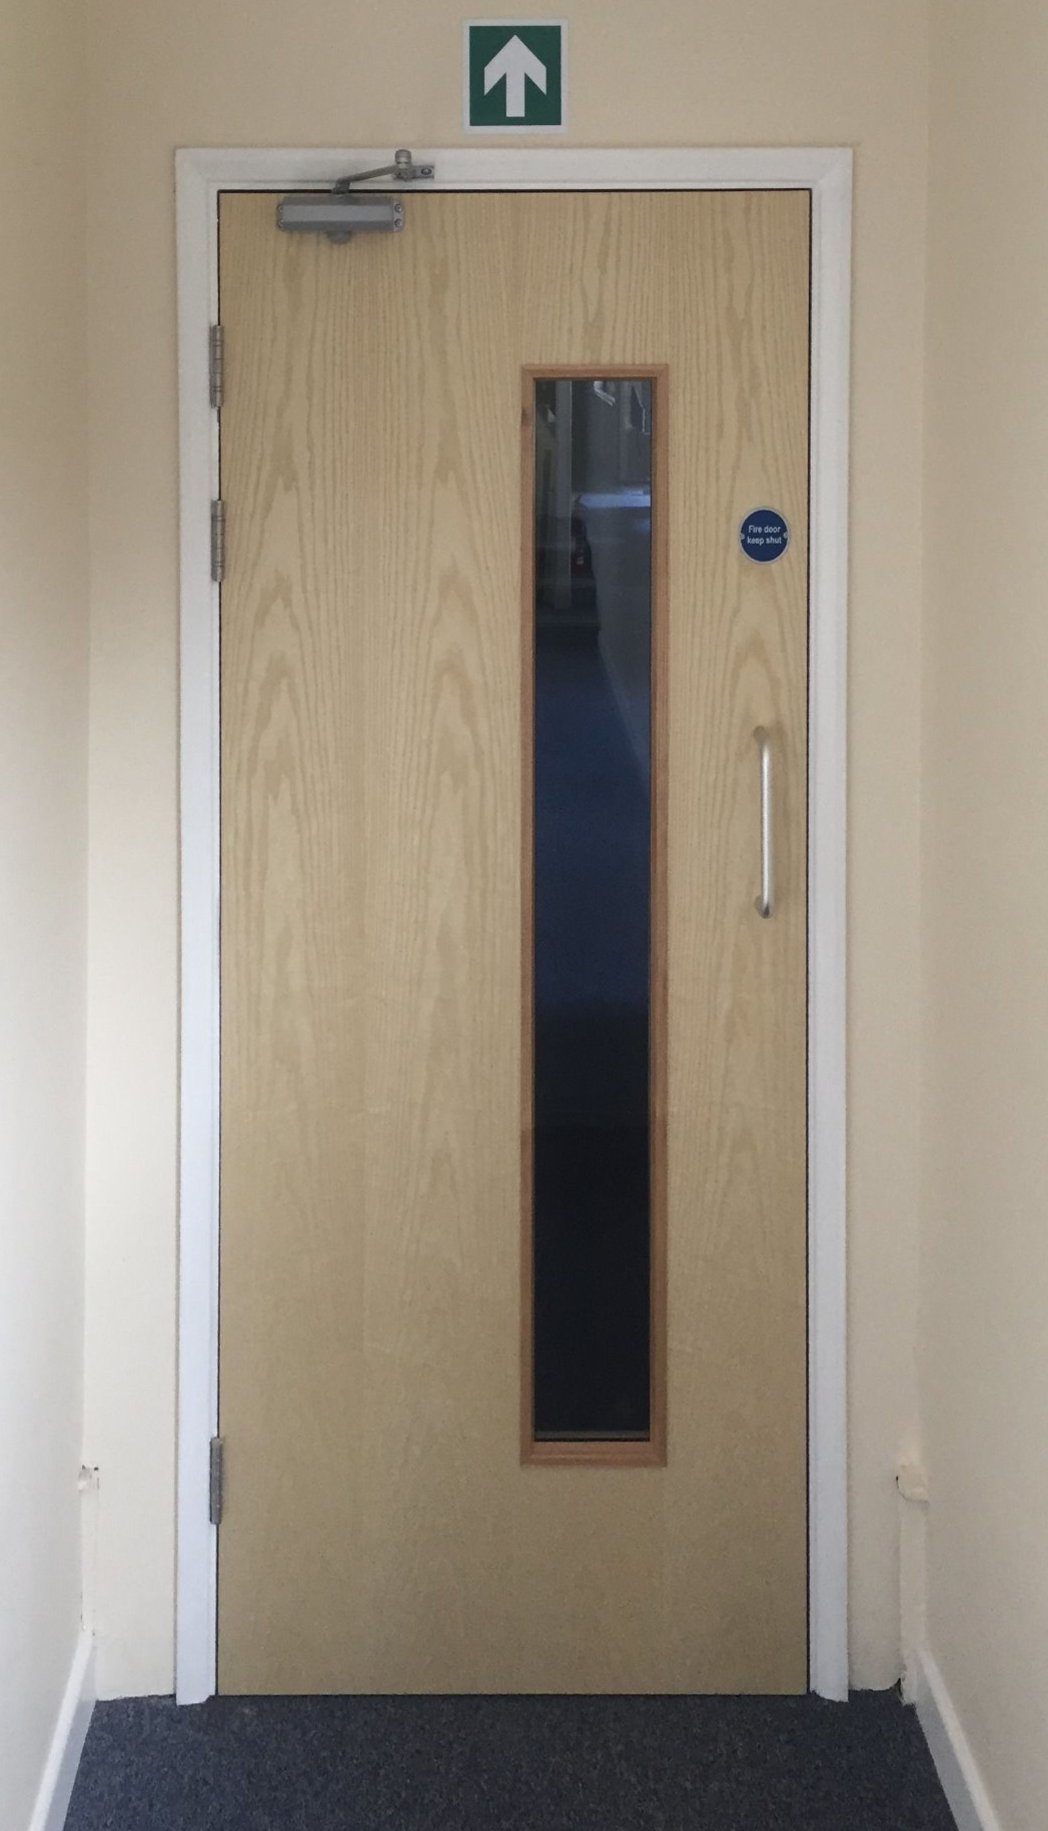 New Fire doors fitted, following inspection revealing Fire doors in corridor of North Devon factory were not compliant